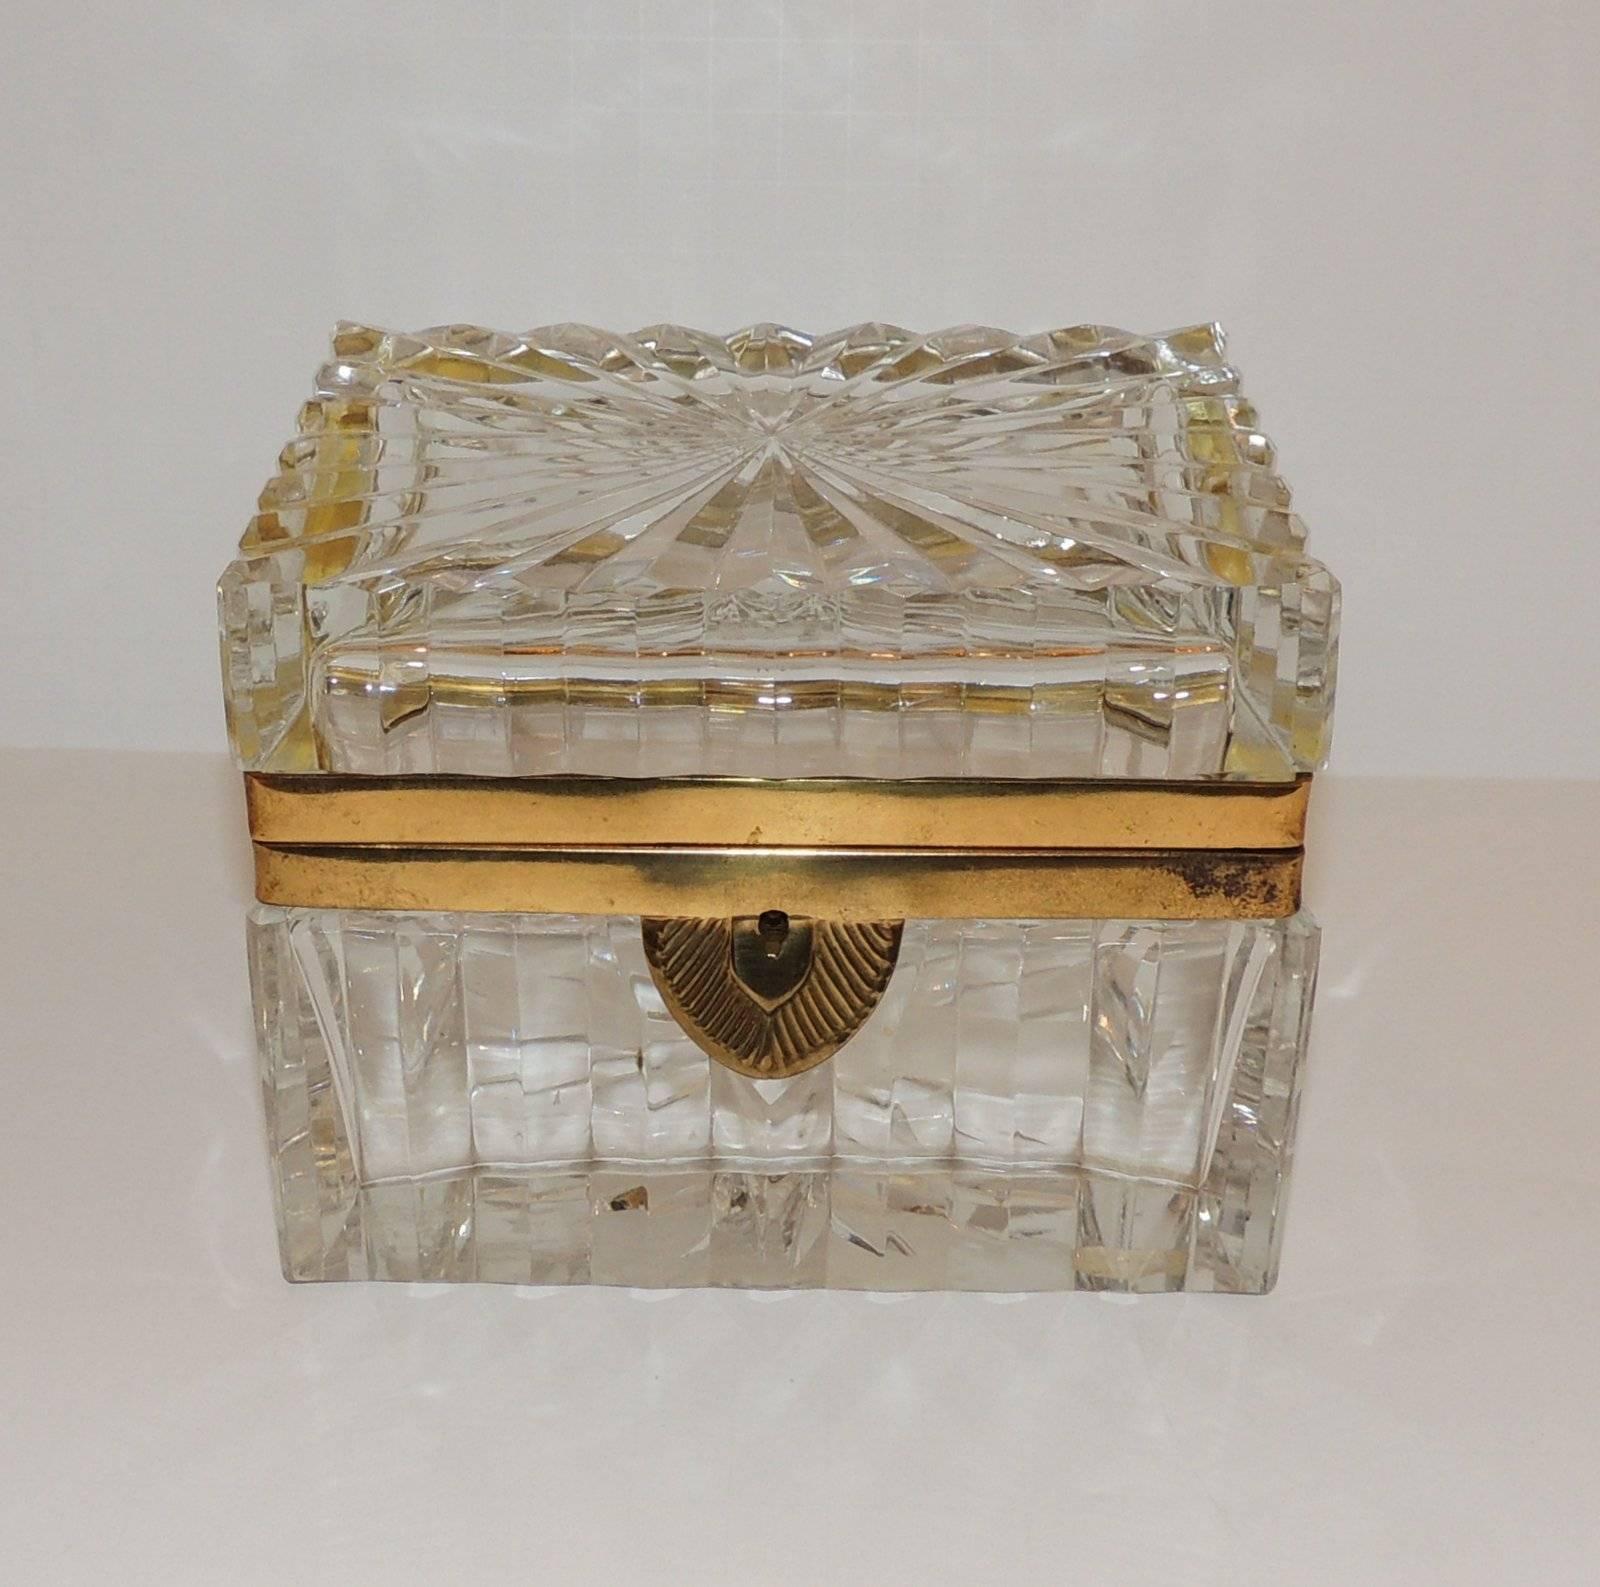 A stunning pair of French clear fluted crystal and ormolu-mounted casket with etched deco style keyhole and key.

Measures: 5.5" L x 4" D x 4.25" H

Sold separately.